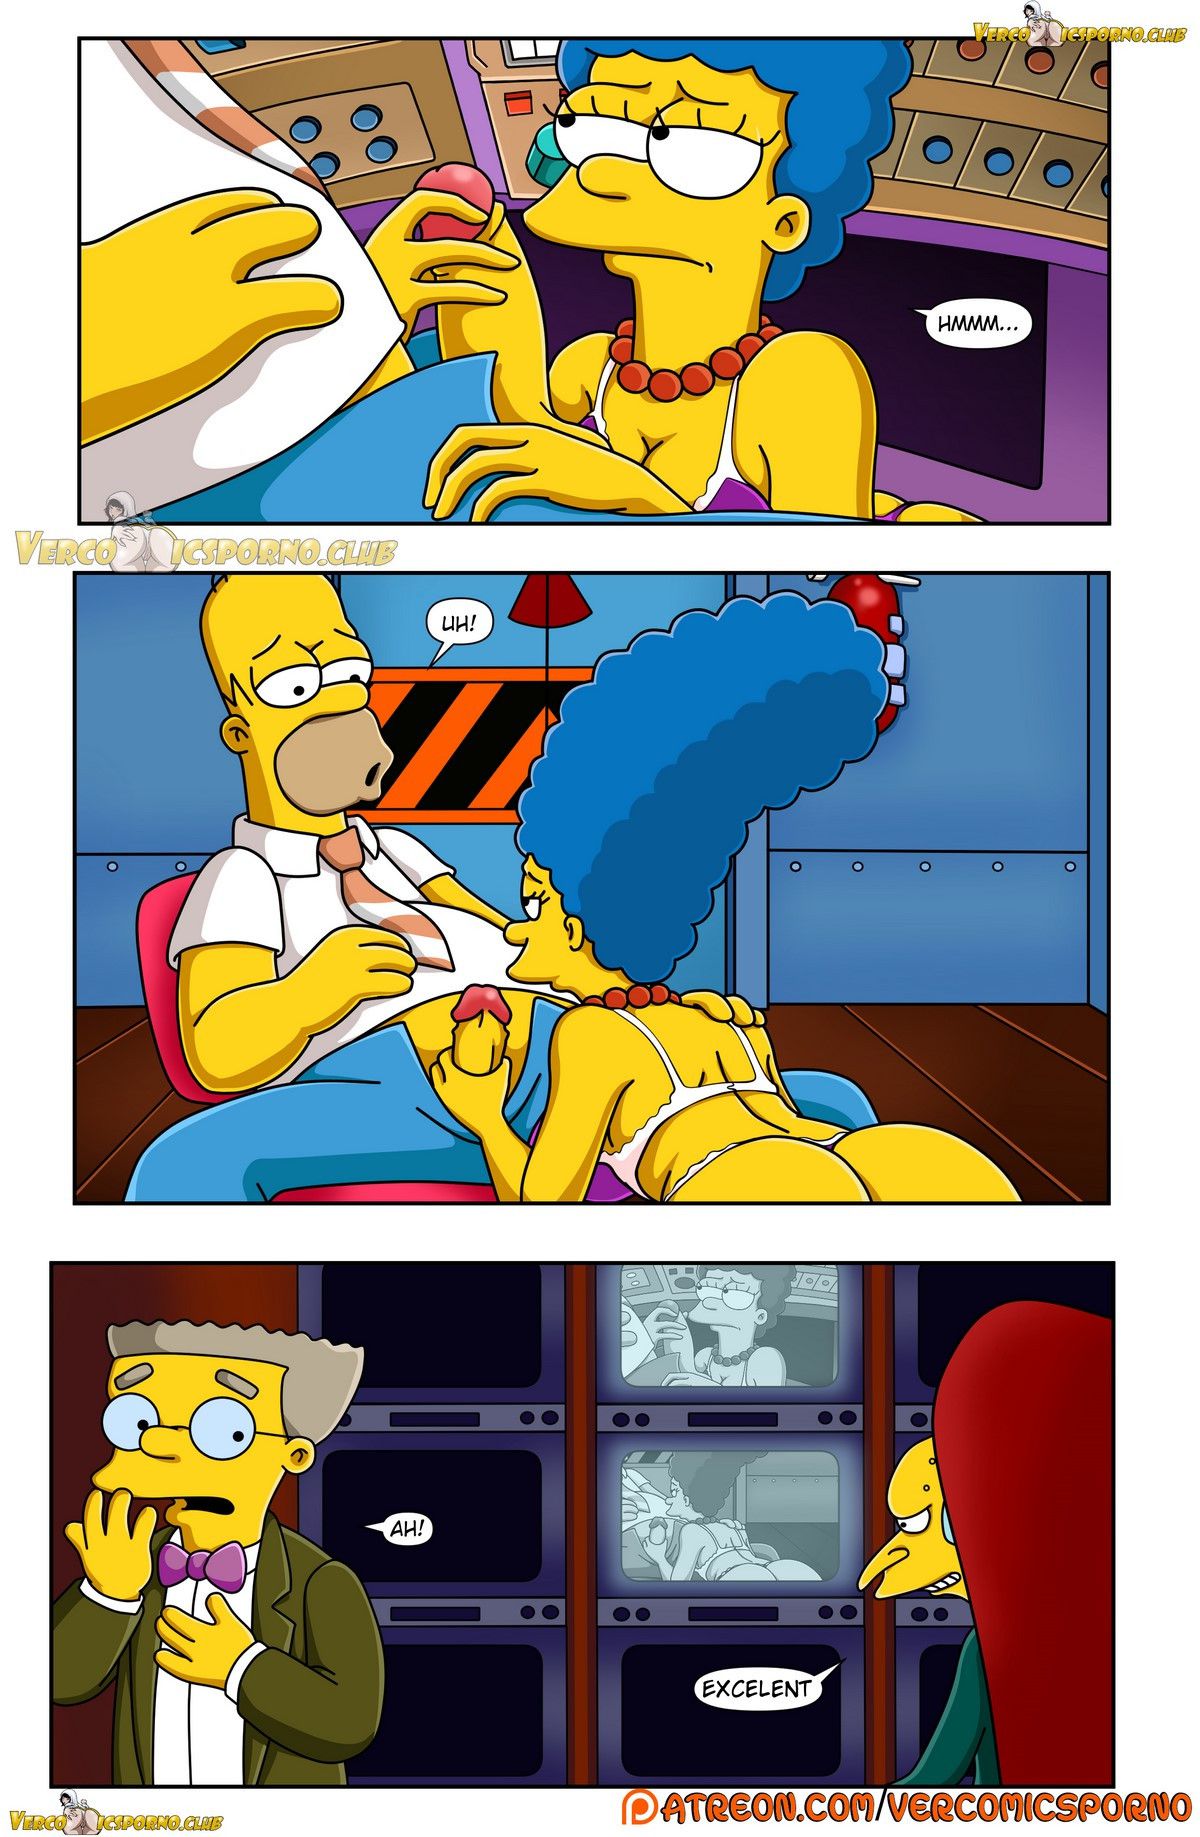 Grandpa and me - [Itooneaxxx] - [Drah Navlag] - [VCP] - [The Simpsons] 3